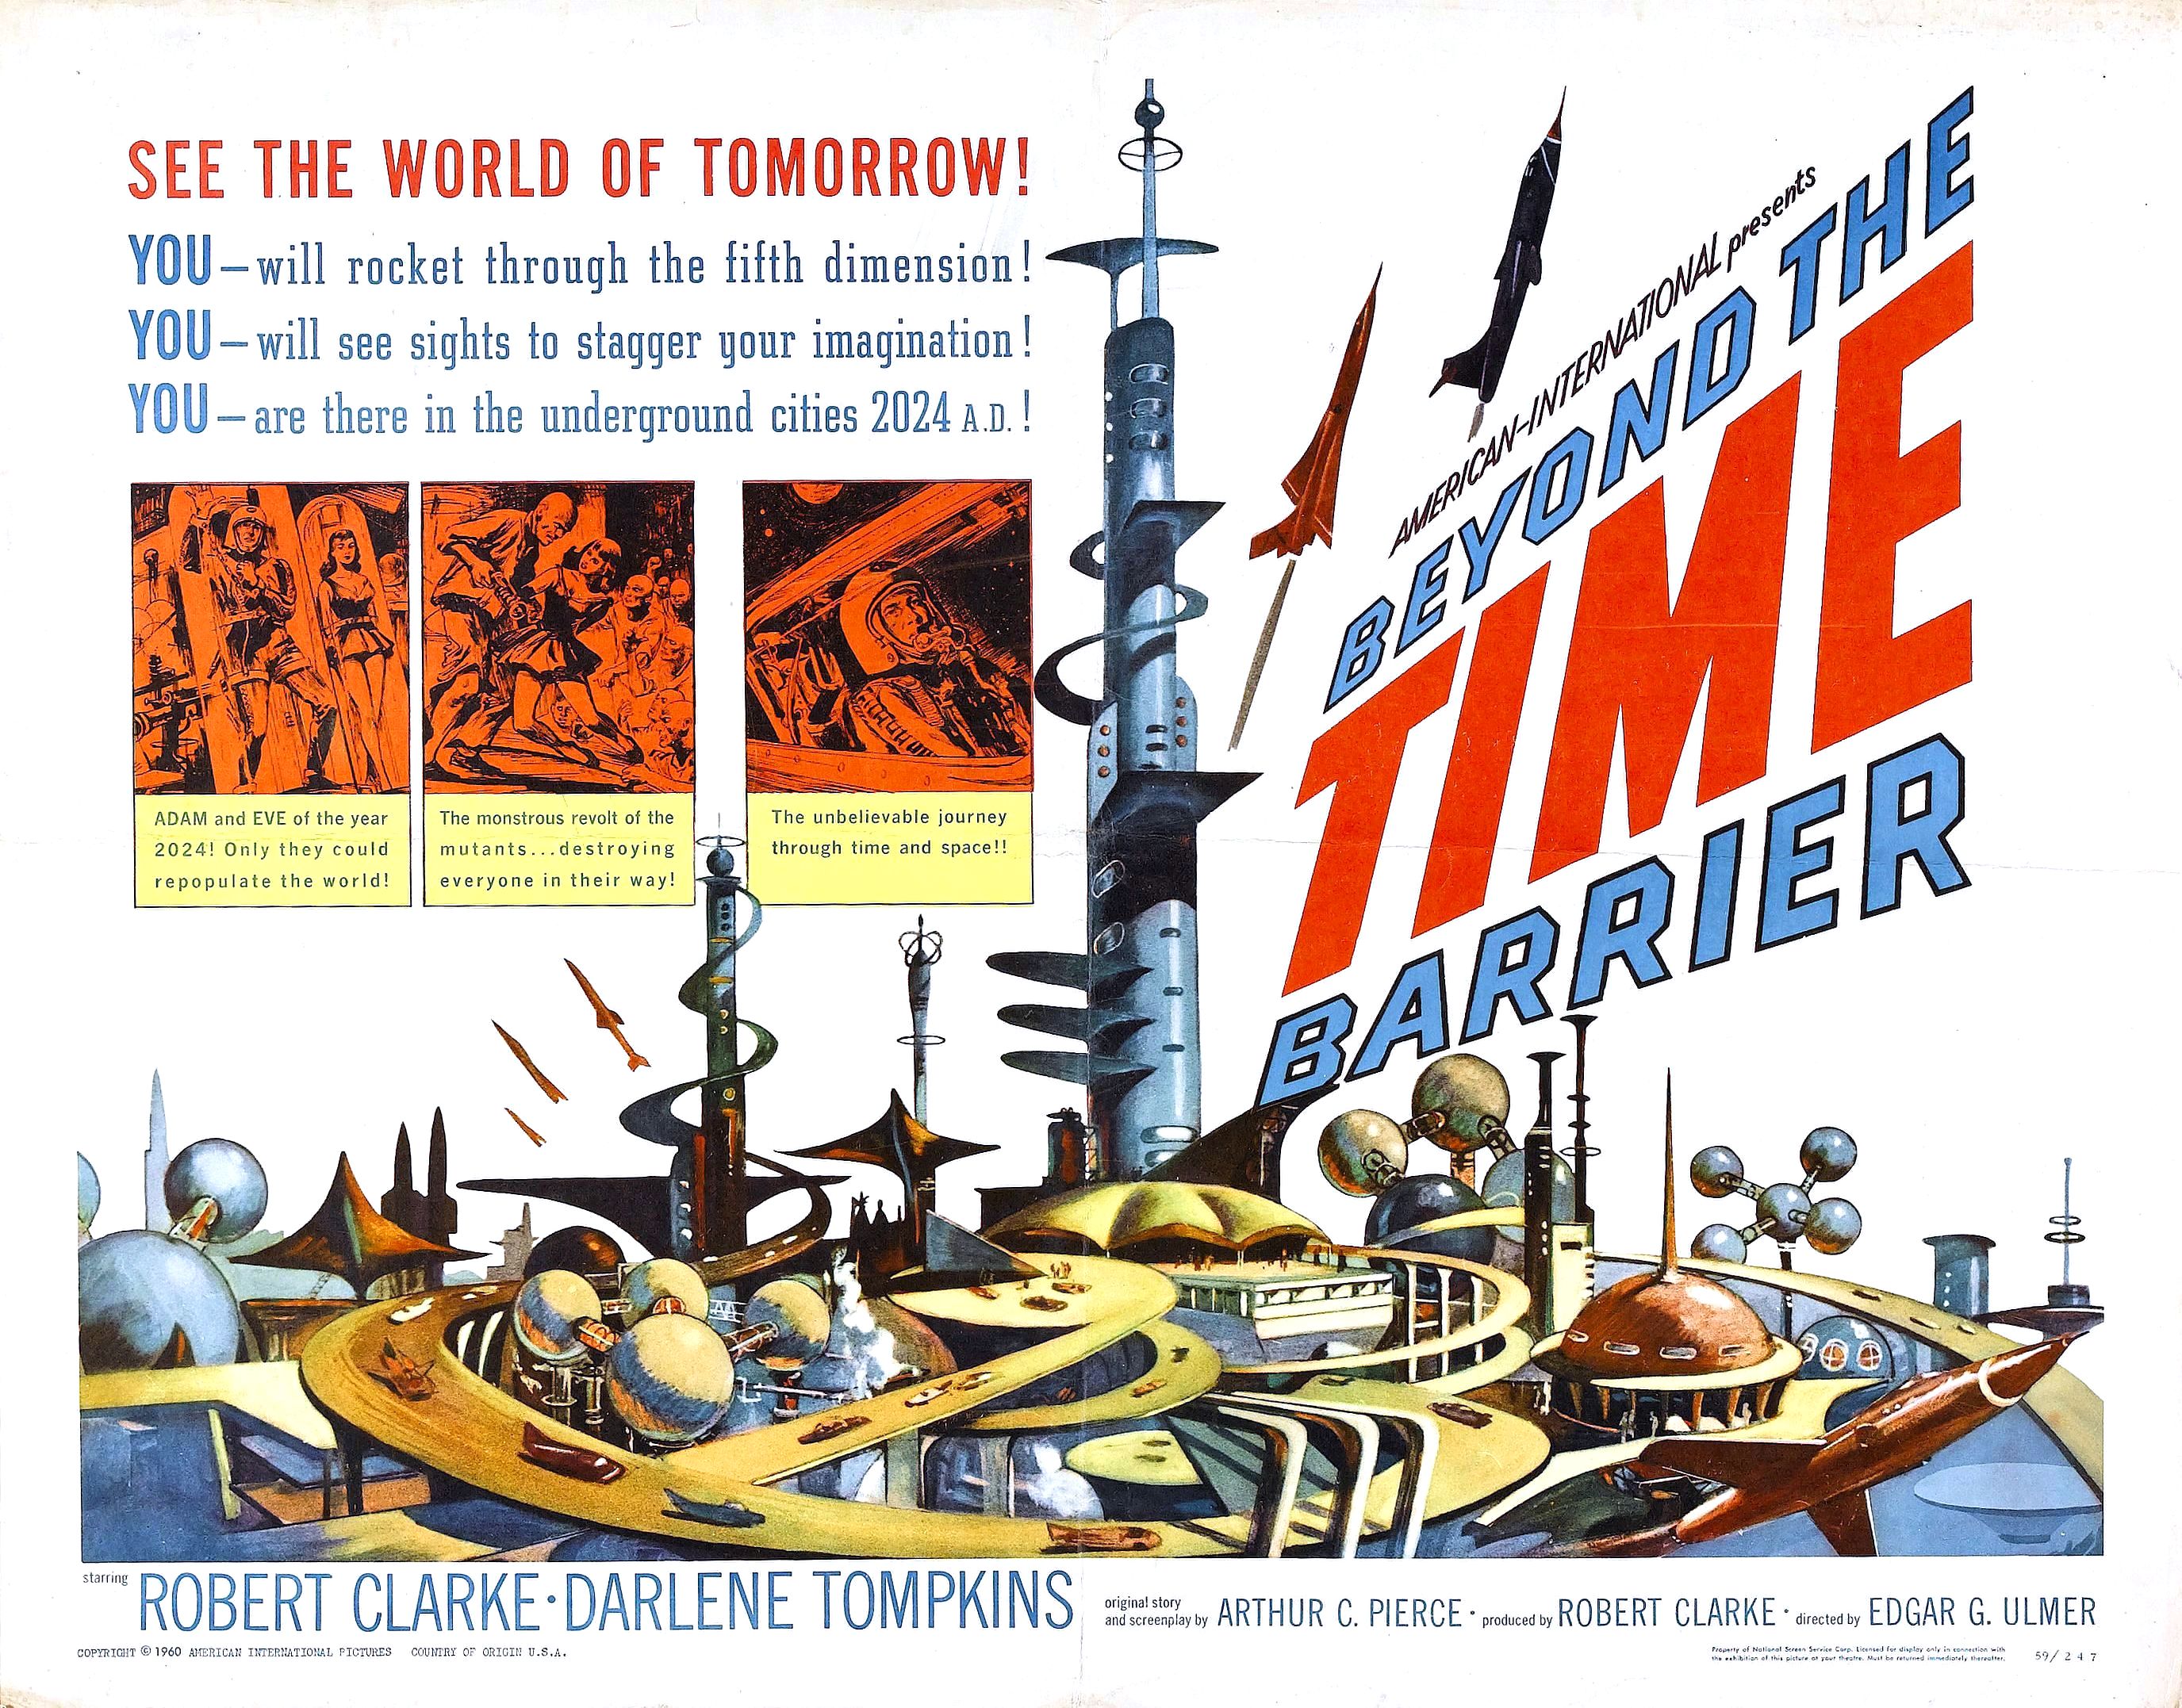 beyond the time barrier (1960) - See The World Of Tomorrow! You will rocket through the fifth dimension! You will see sights to stagger your imagination! You are there in the underground cities 2024 Ad! Capaiwan Beyond The The b eamer tepspullebe seria Ba